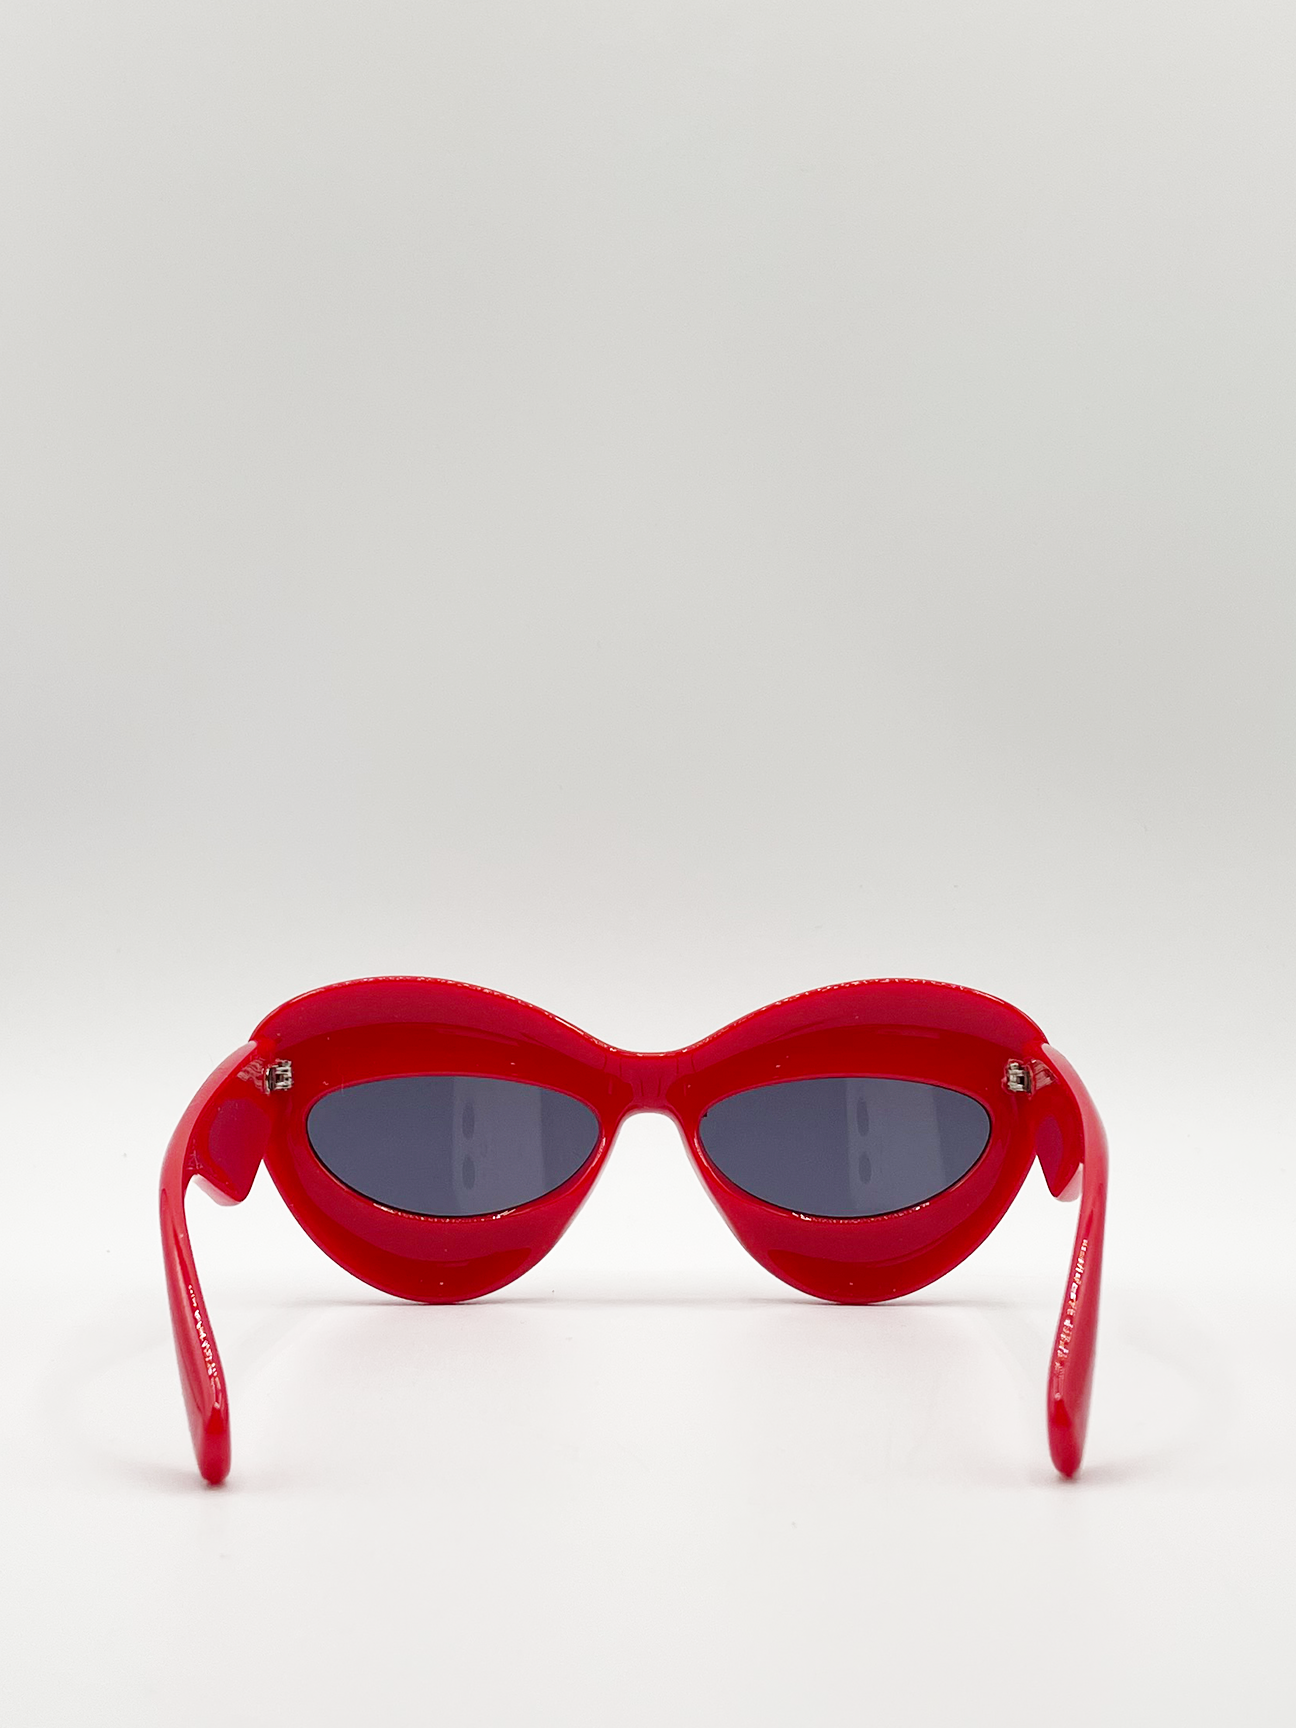 Chunky sunglasses in red